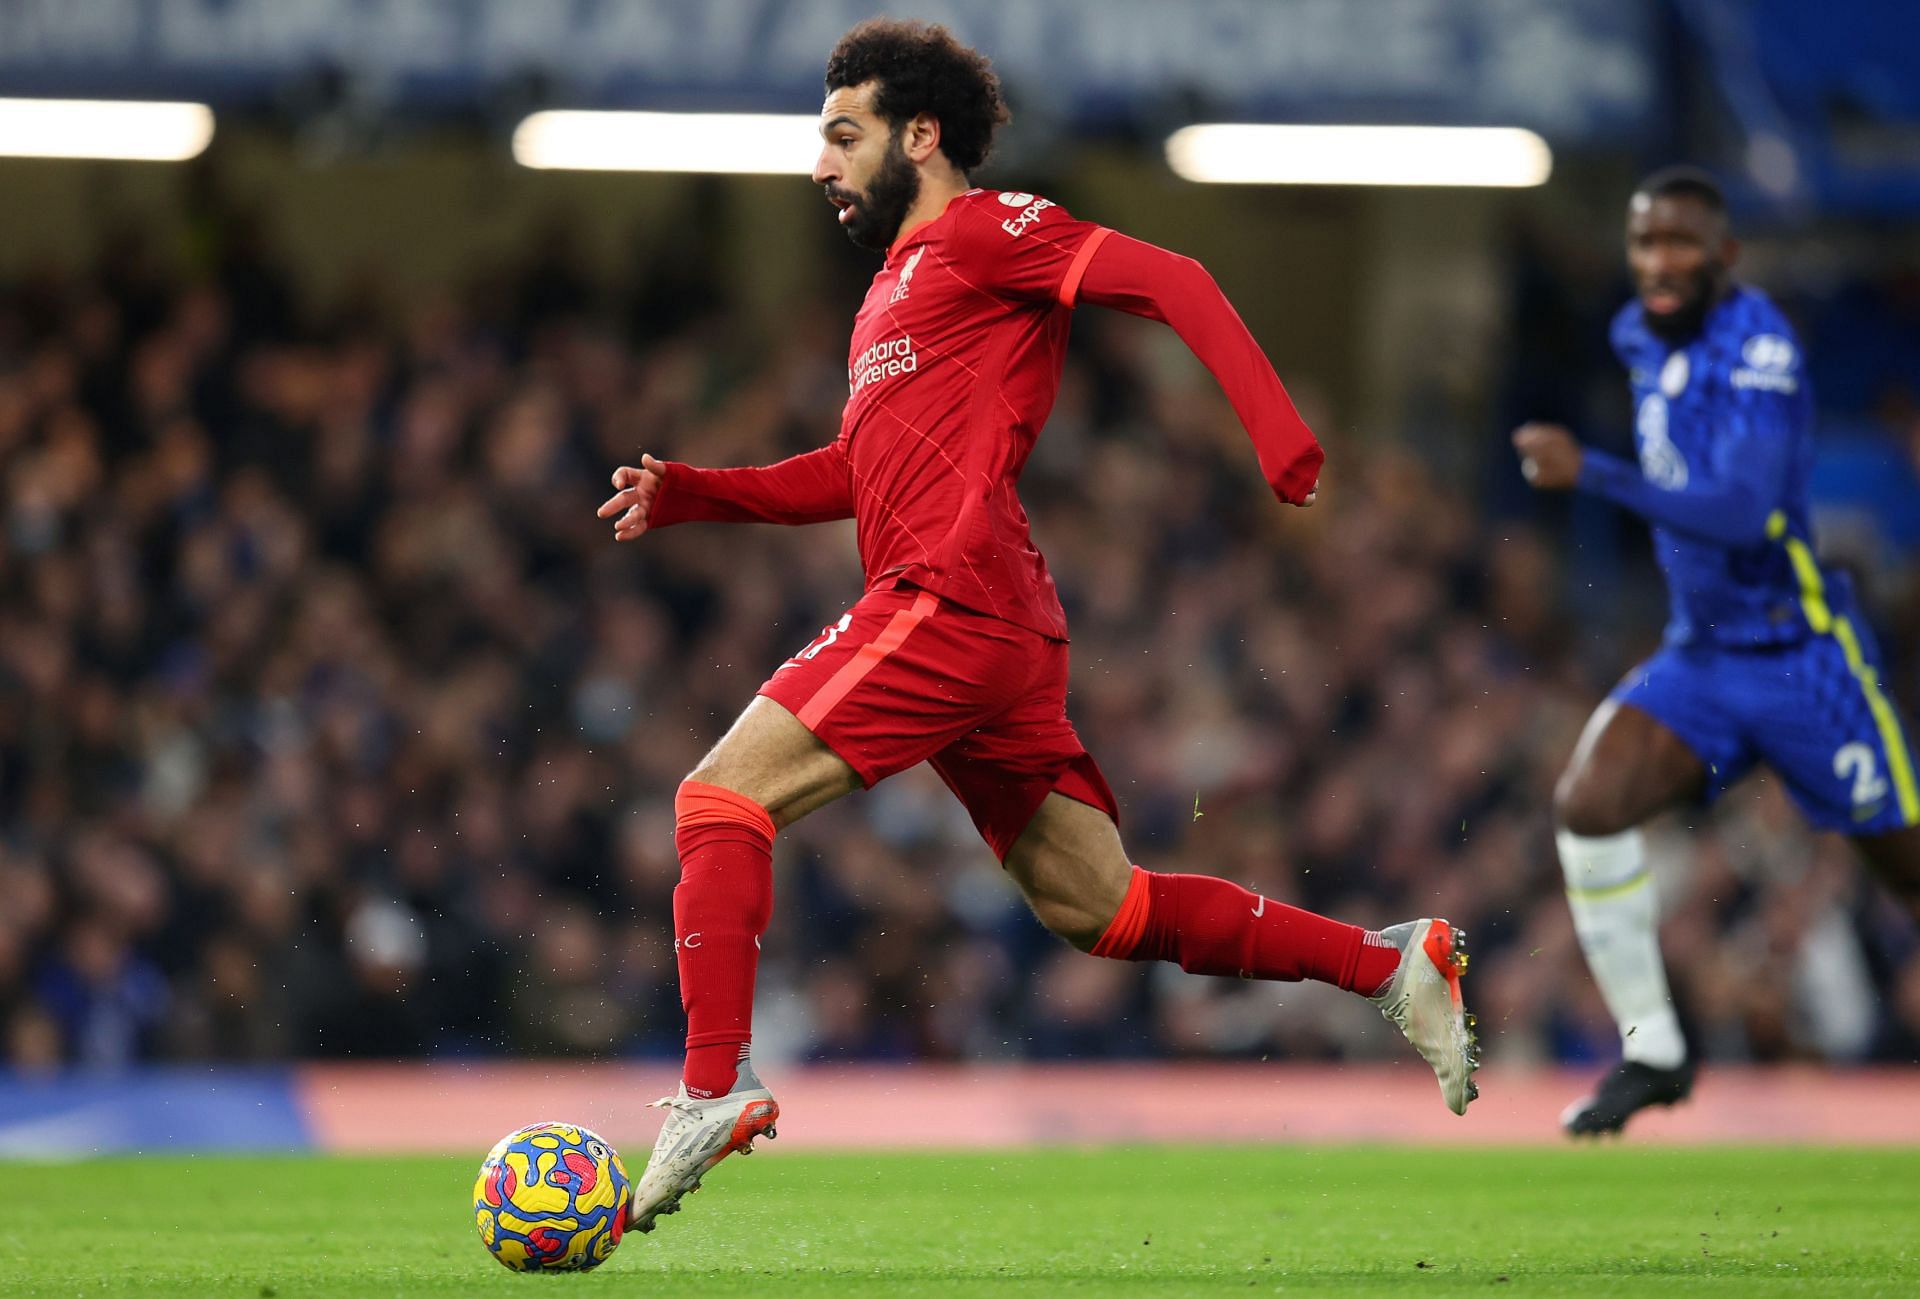 Mohamed Salah has been on a tear this season for Liverpool.